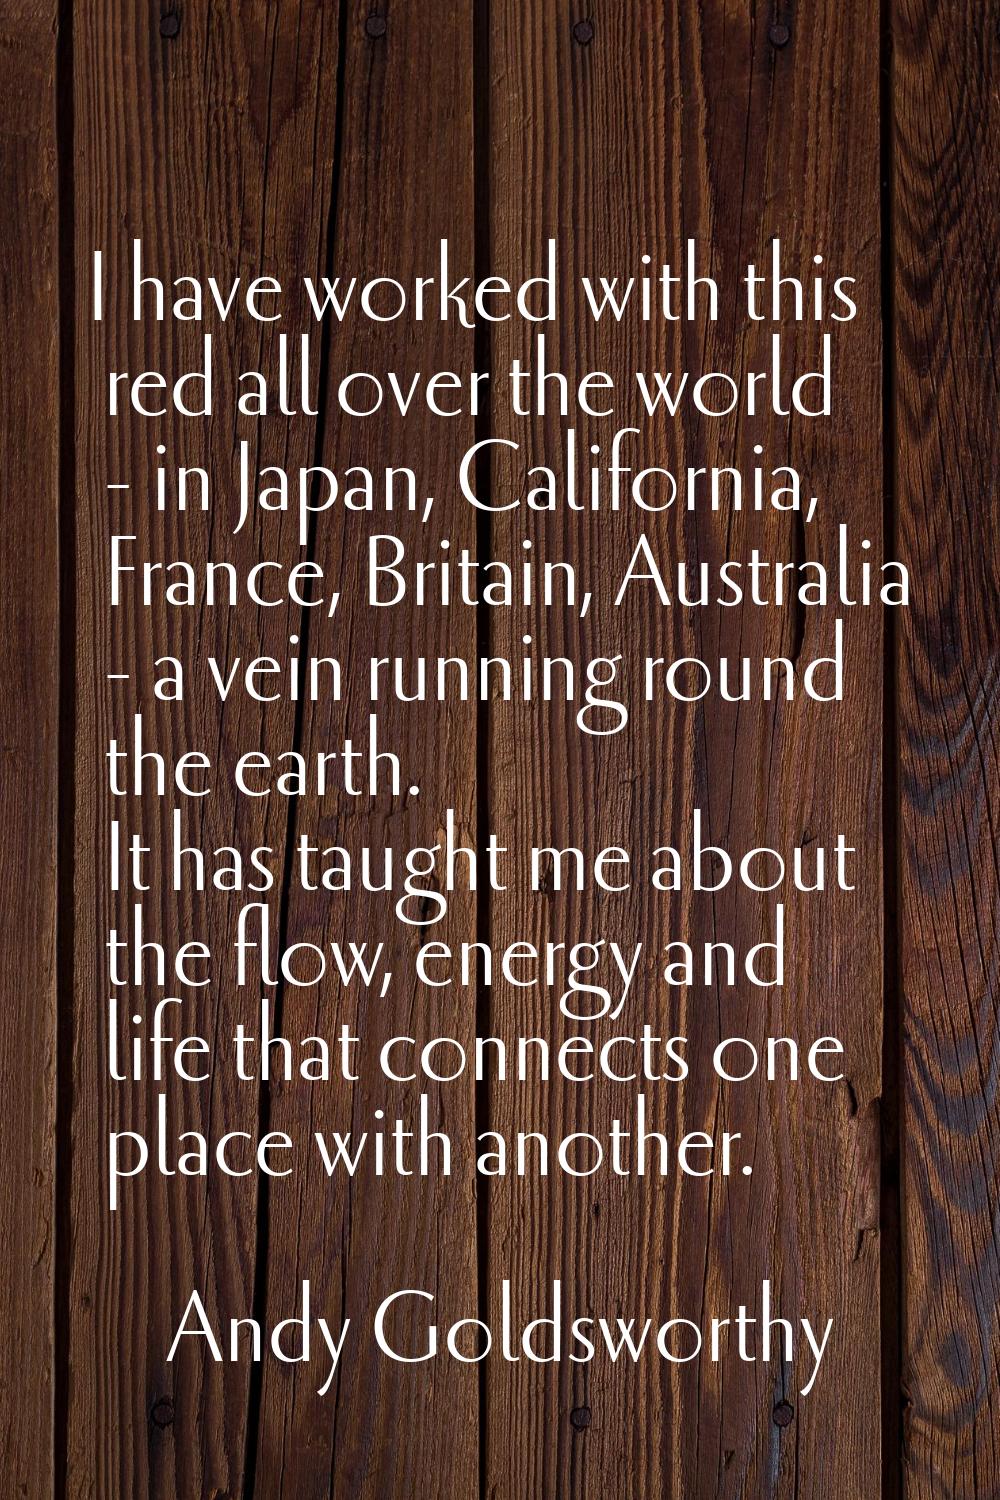 I have worked with this red all over the world - in Japan, California, France, Britain, Australia -